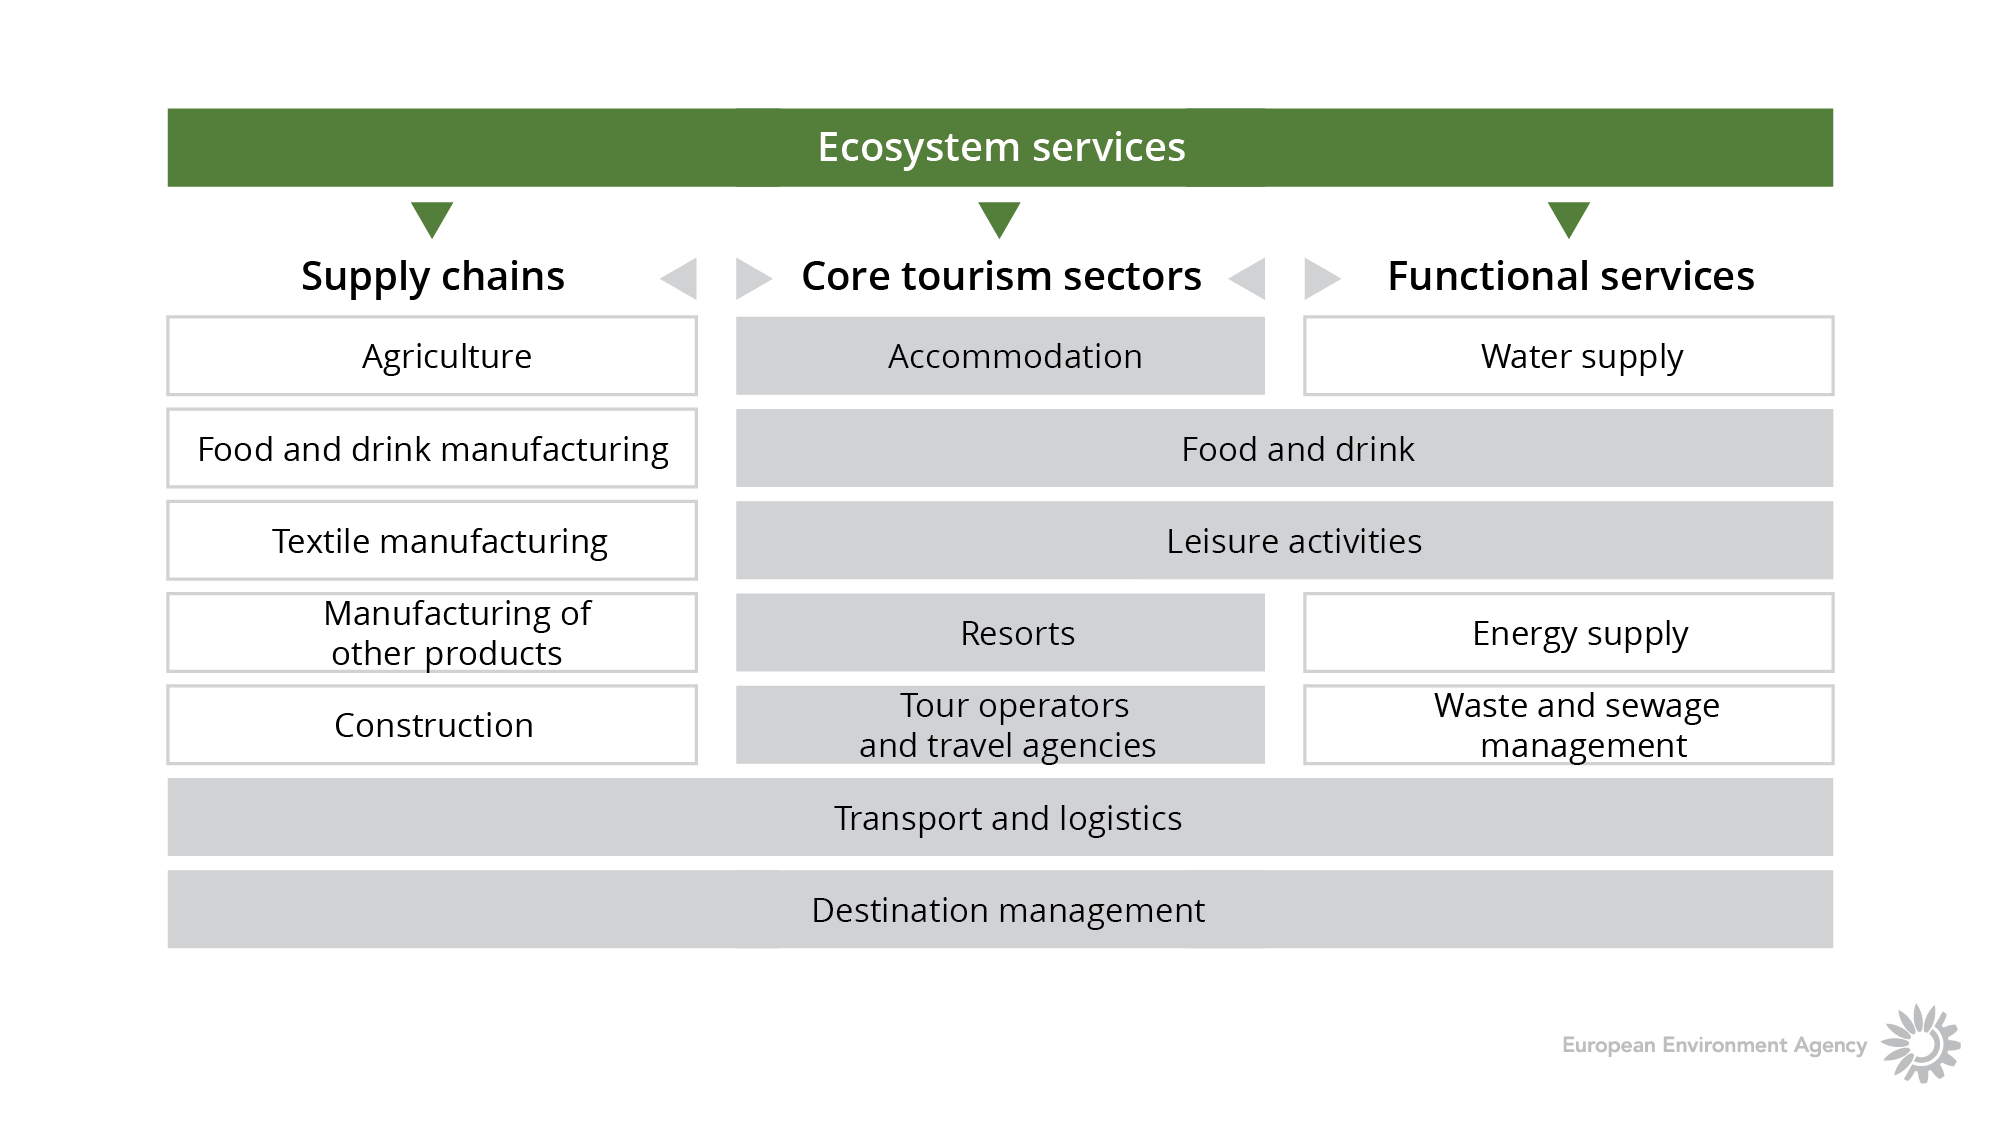 Components of the tourism system